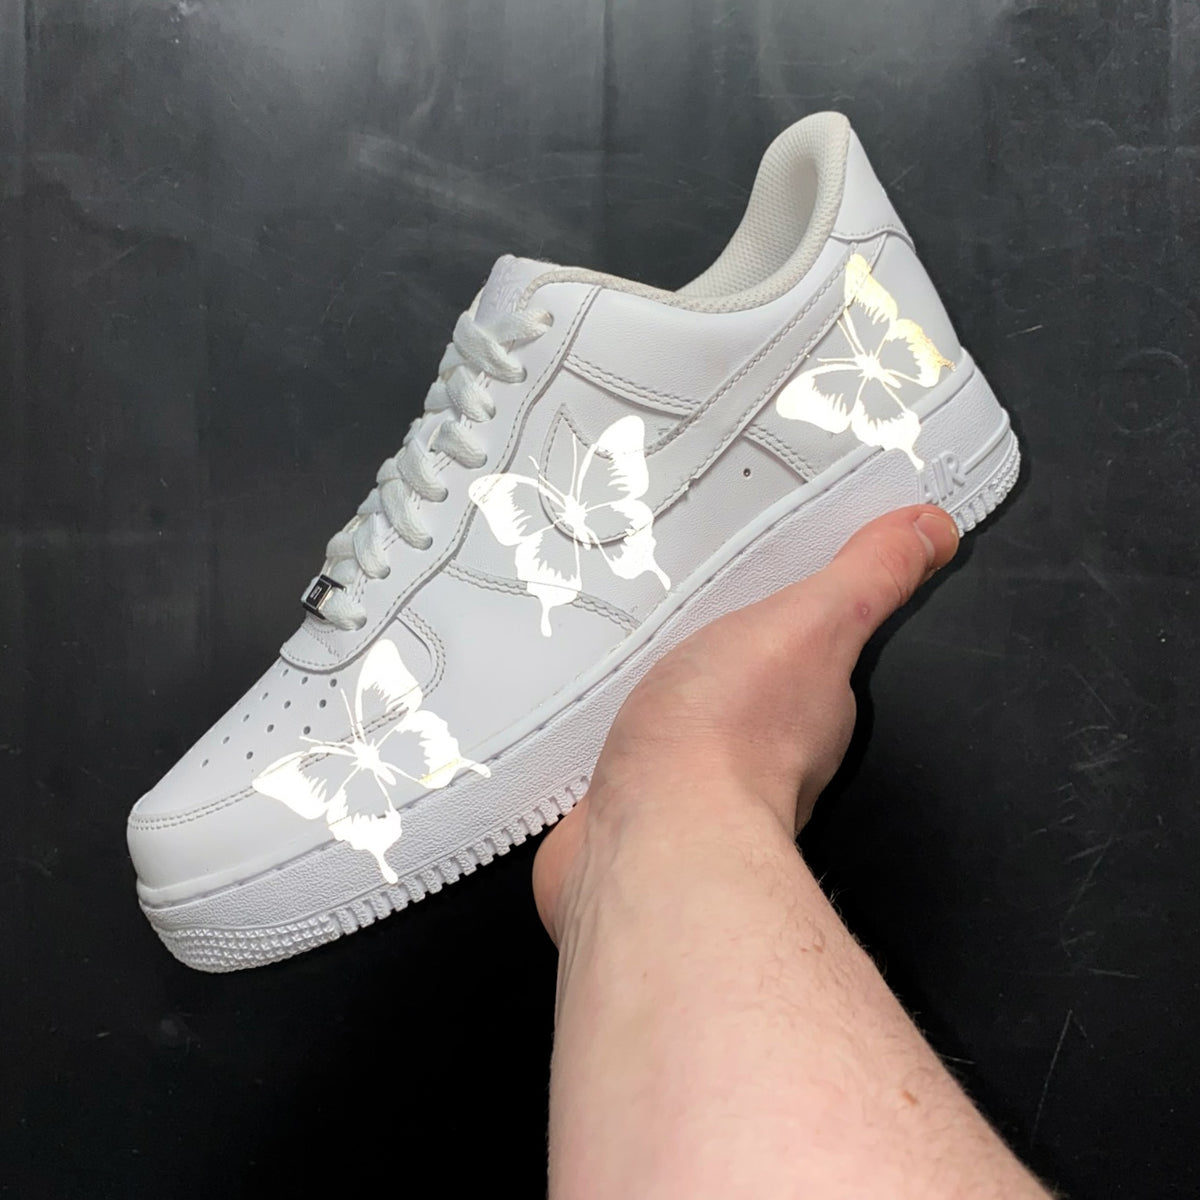 holographic butterfly air force 1